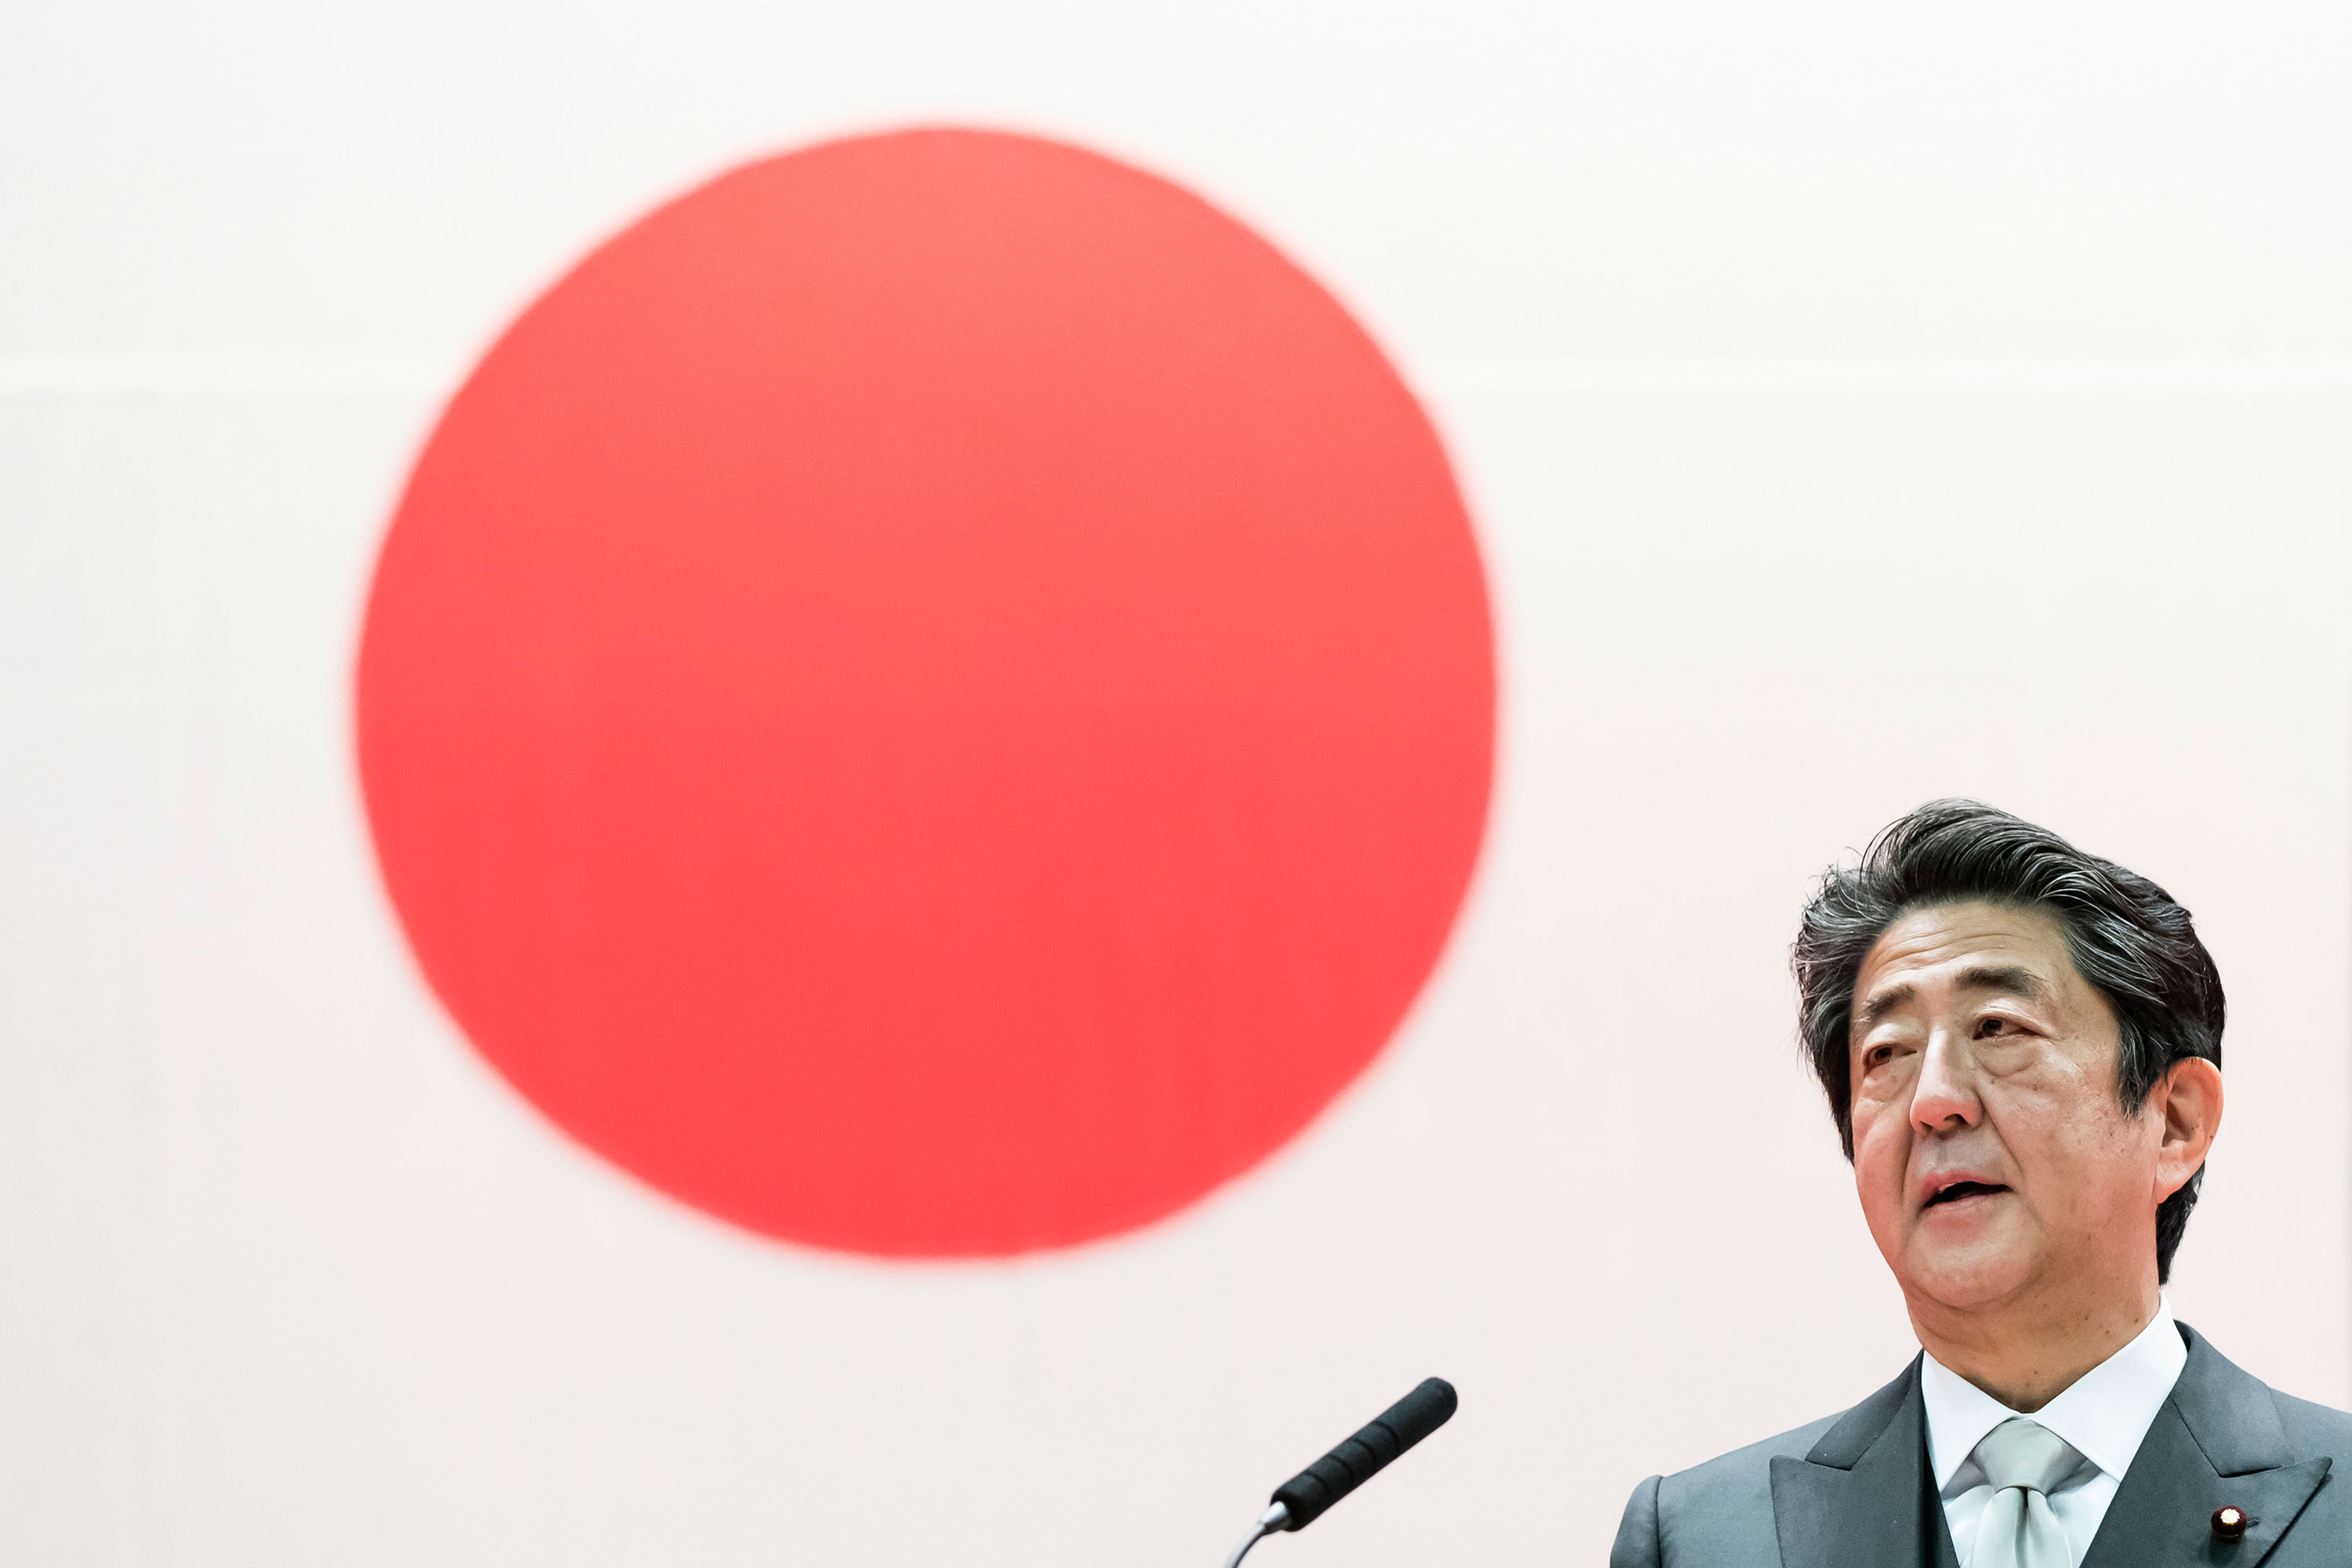 Japan's Prime Minister Shinzo Abe speaks during the graduation ceremony of the National Defense Academy on March 22, 2020 in Yokosuka, Japan.